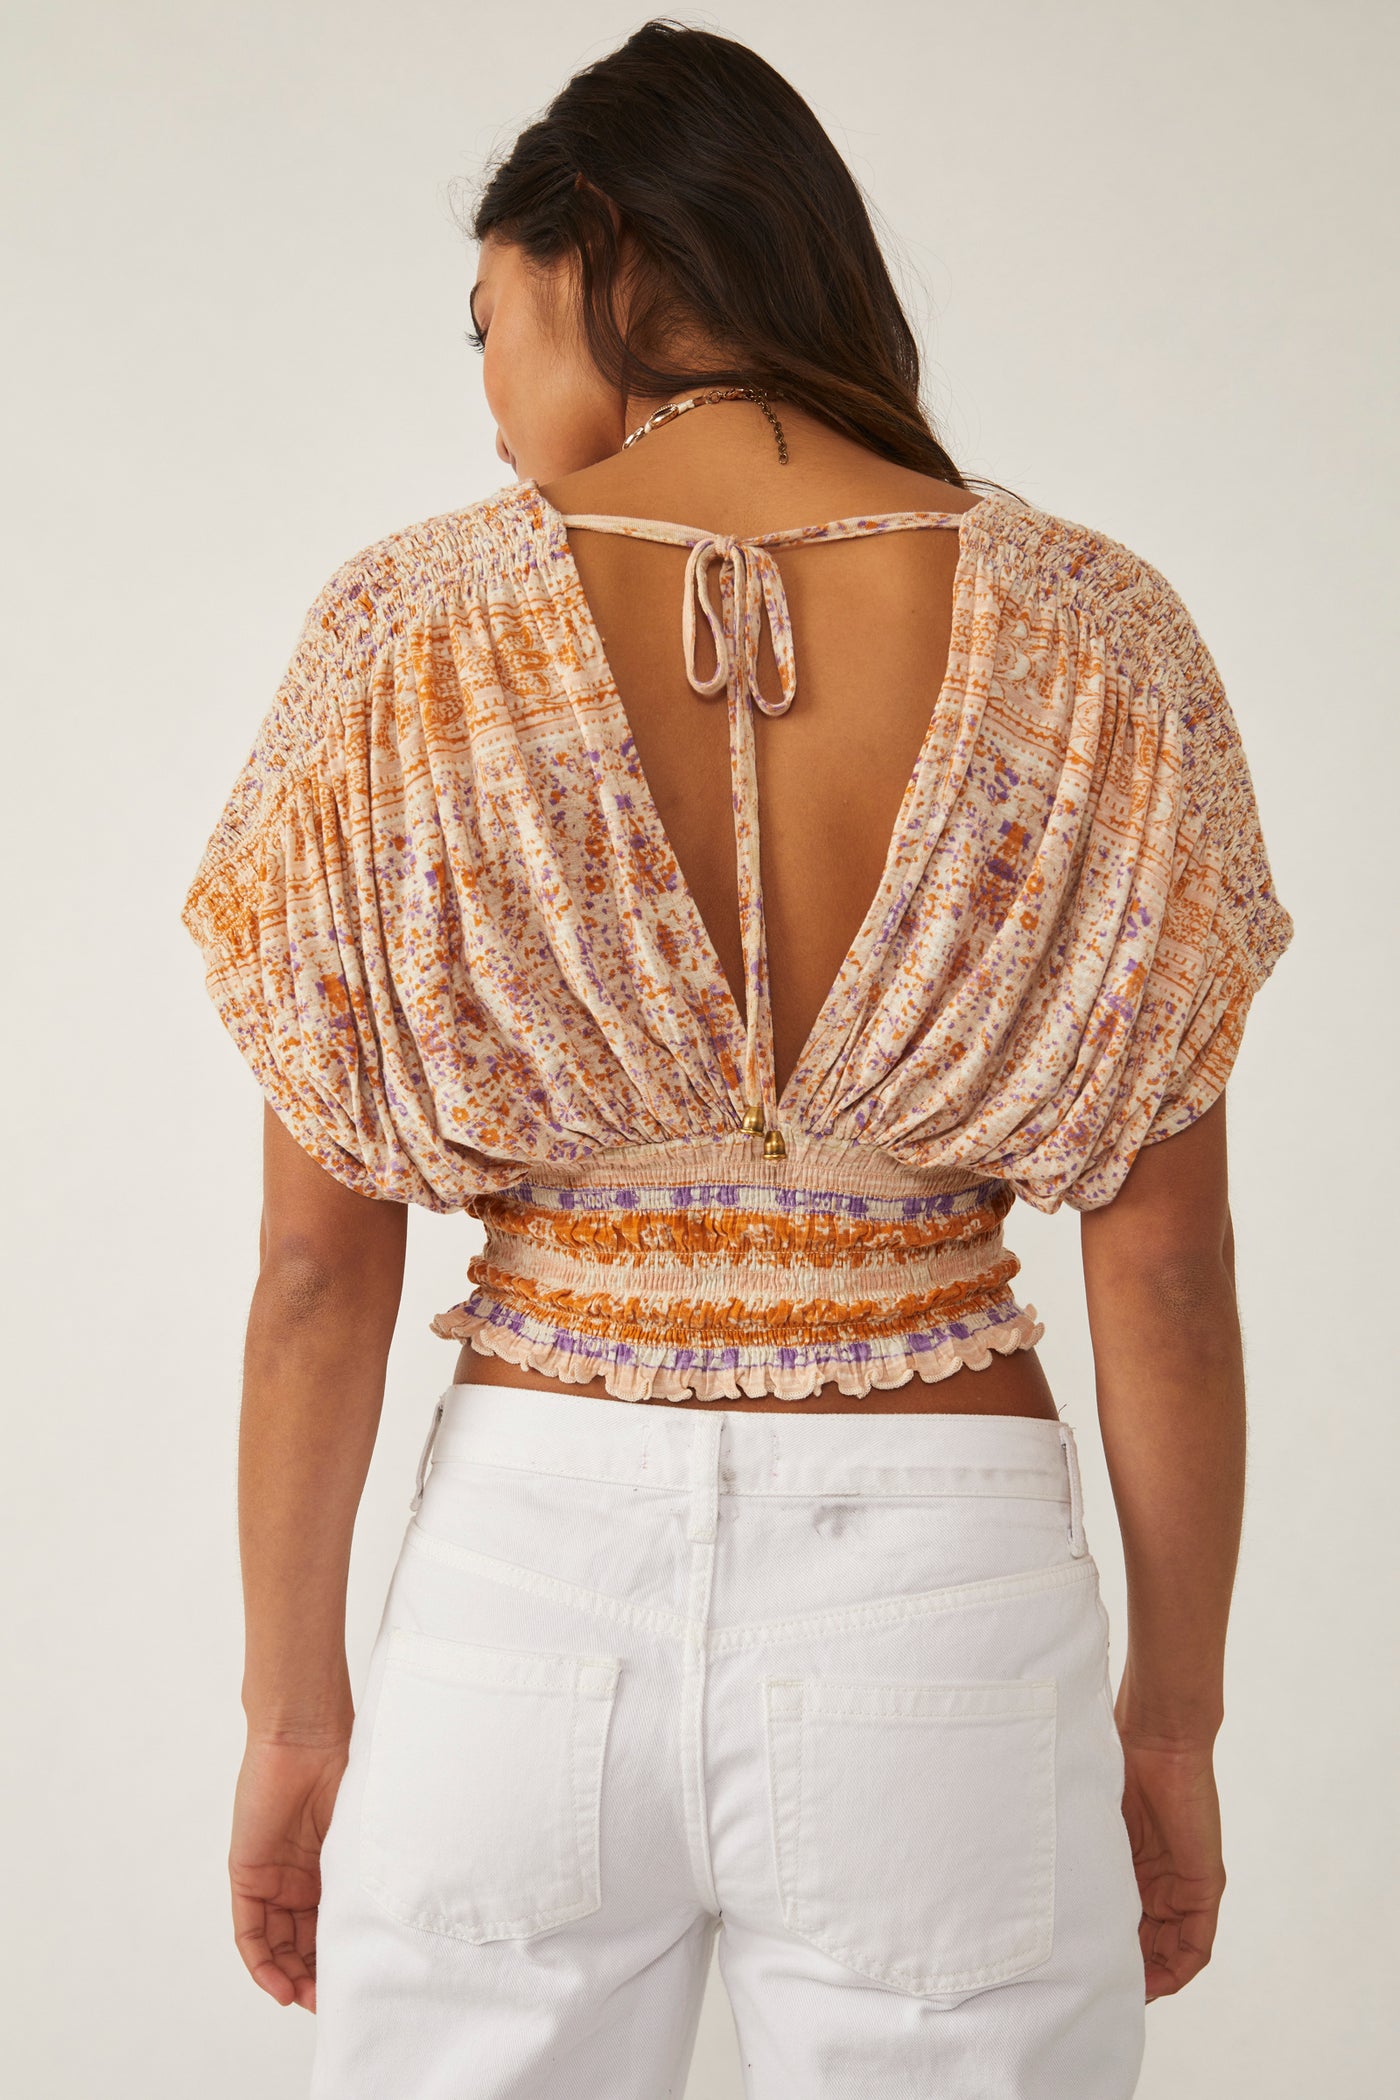 Next Vacation Top - Ivory